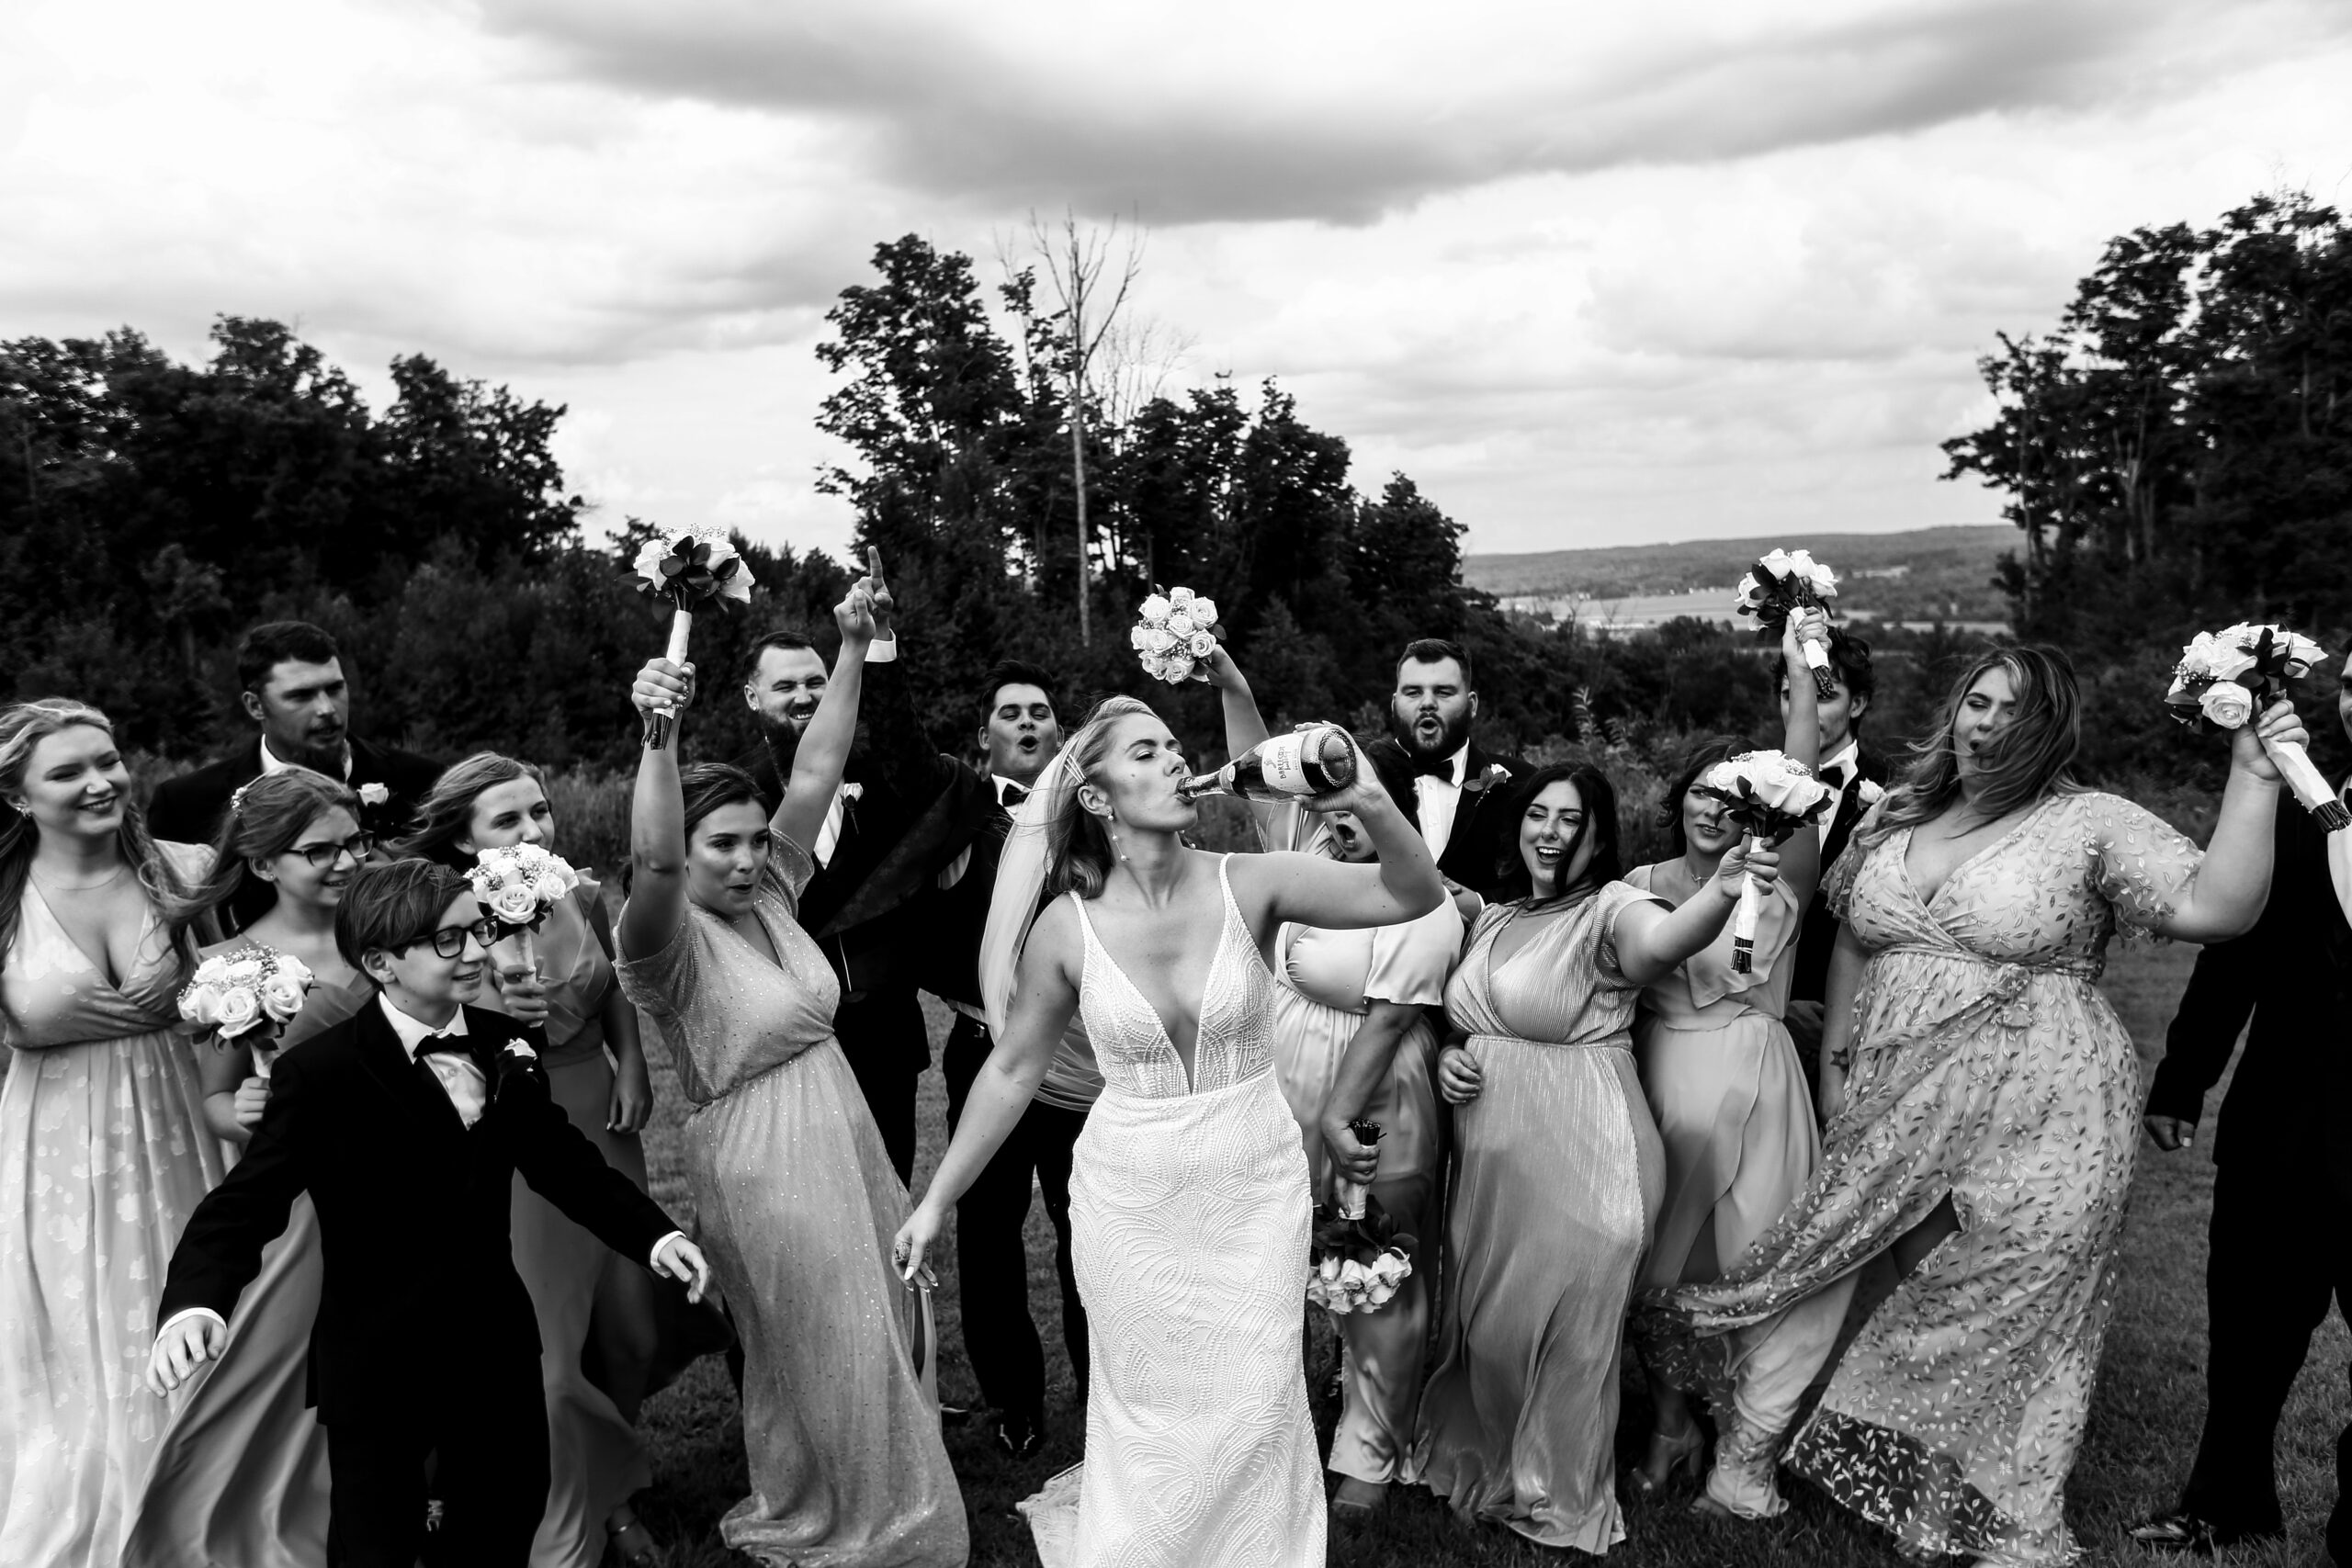 A bride drinking from a champagne bottle while the wedding party cheers around her.